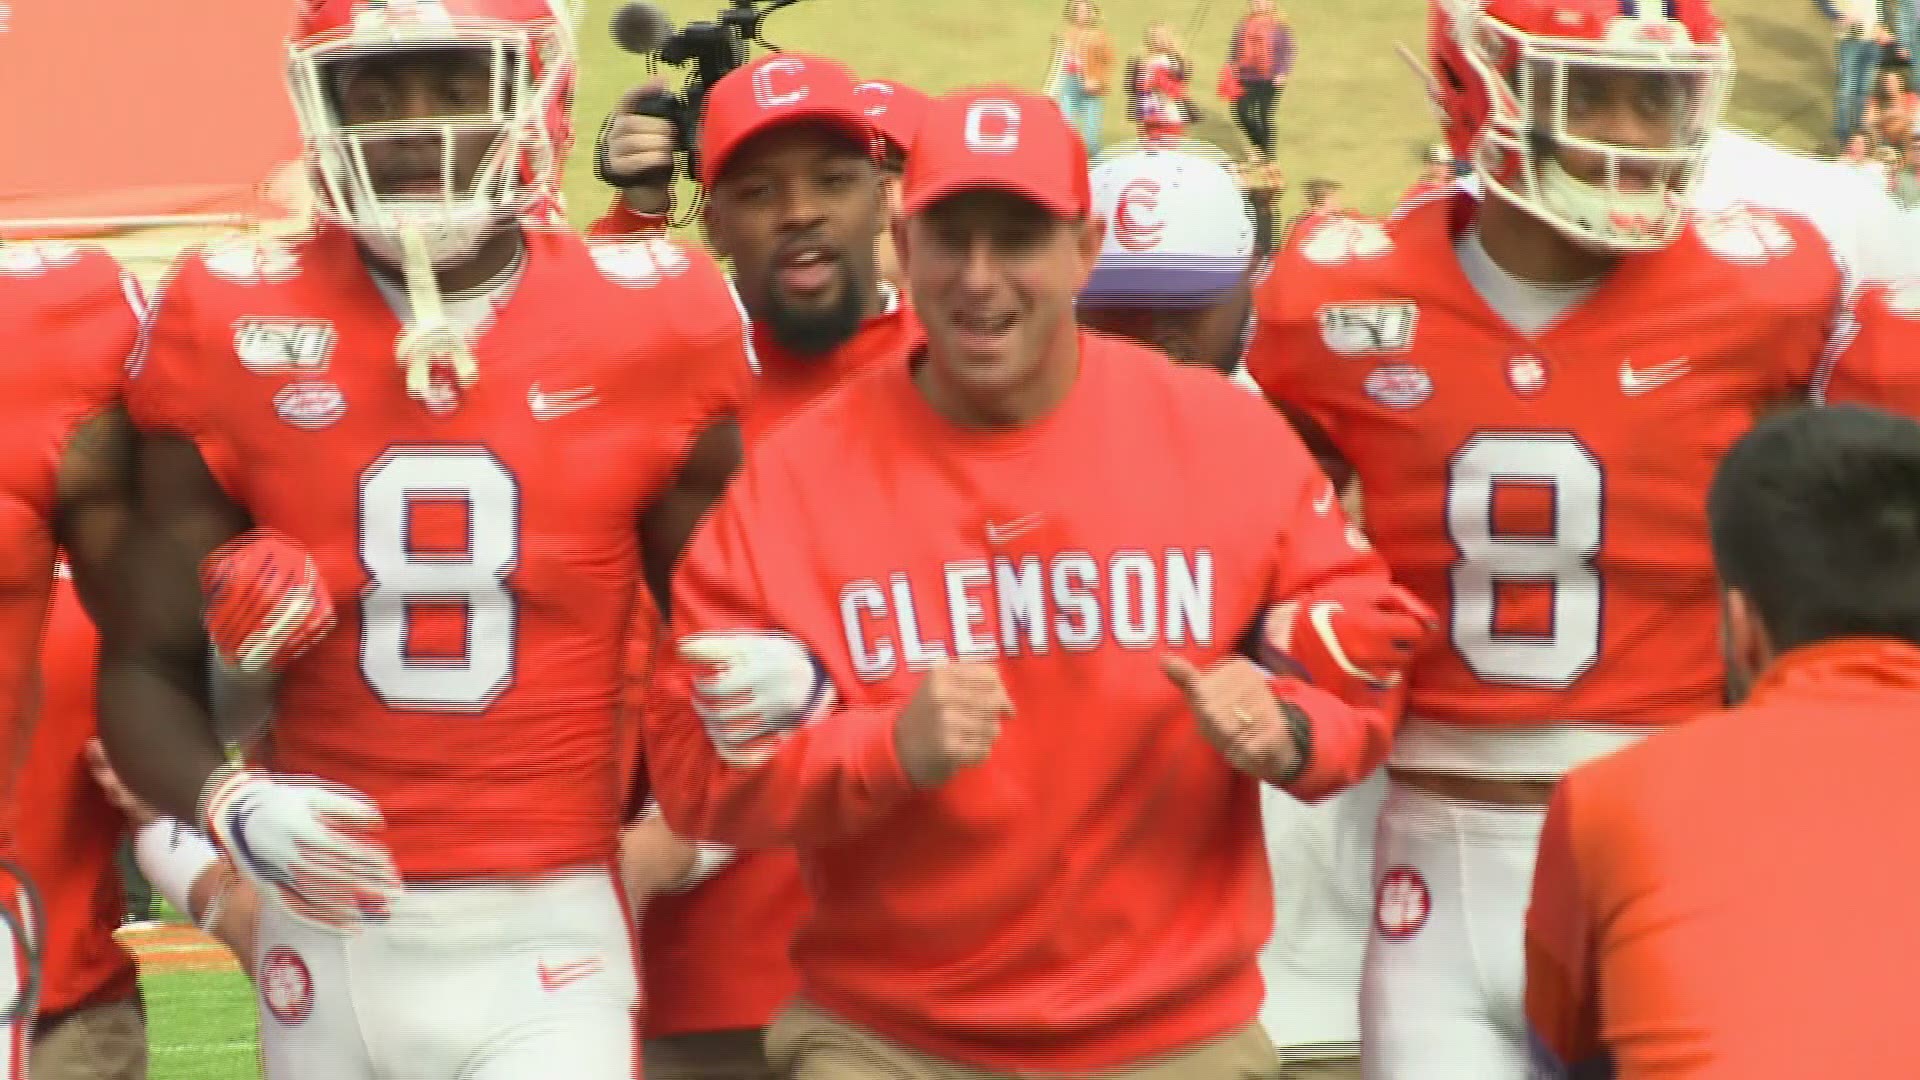 During his conference call with the media Friday, Clemson head football coach Dabo Swinney gave a pep talk for college football fans and the country in general.